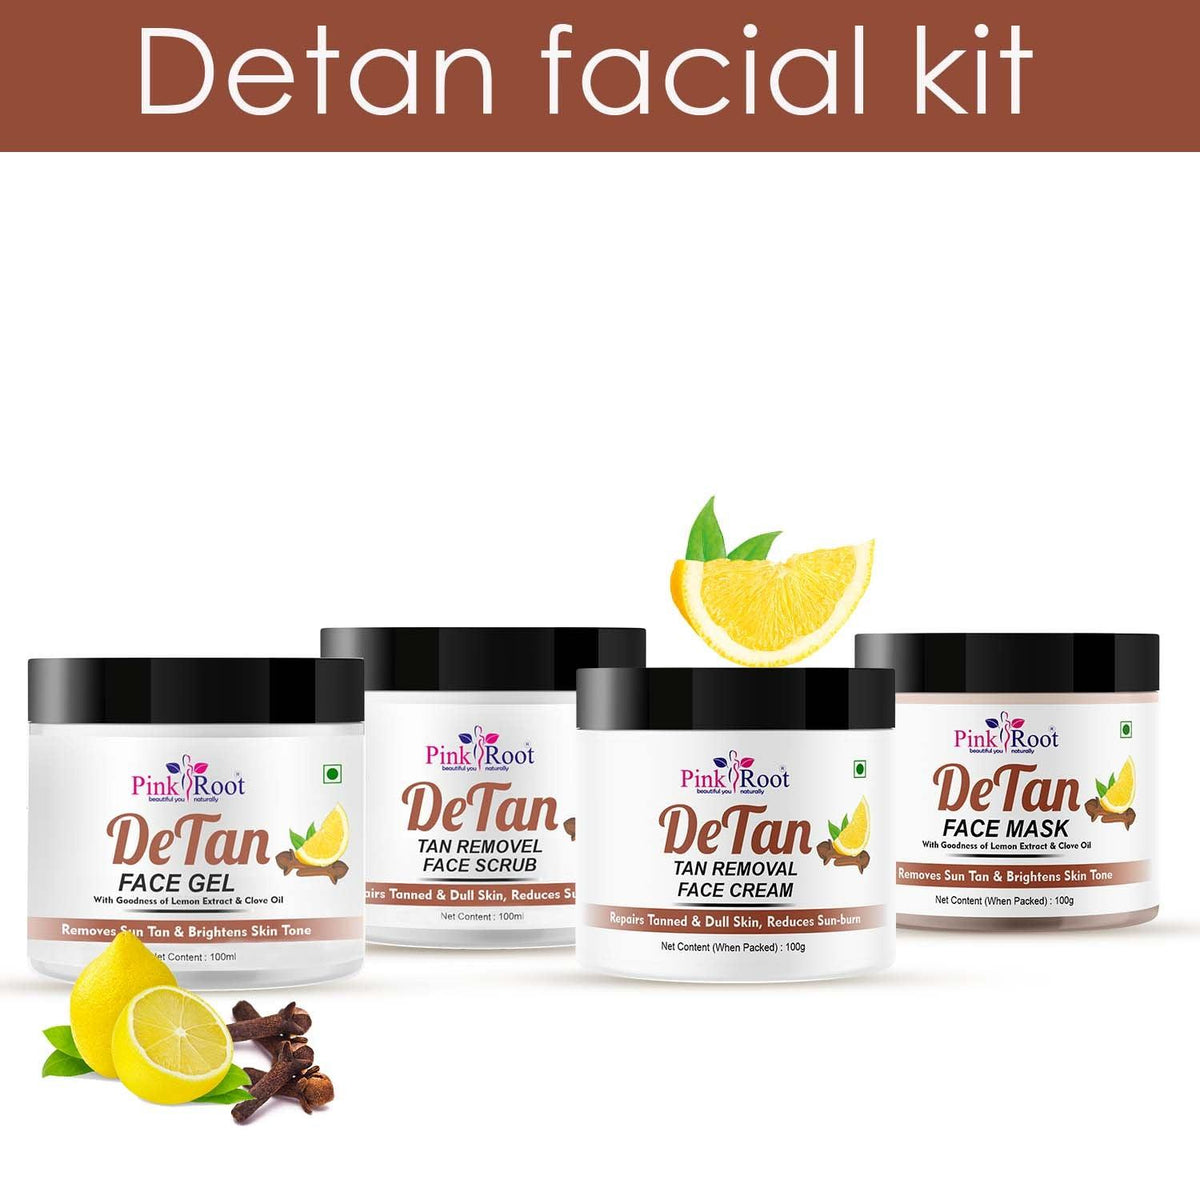 Pink Root Detan Facial kit 400gm, helps in Tan Removal, Removes Blackheads & Whiteheads & gives smooth, brighter, shiner, clean & dirt free skin - Pink Root